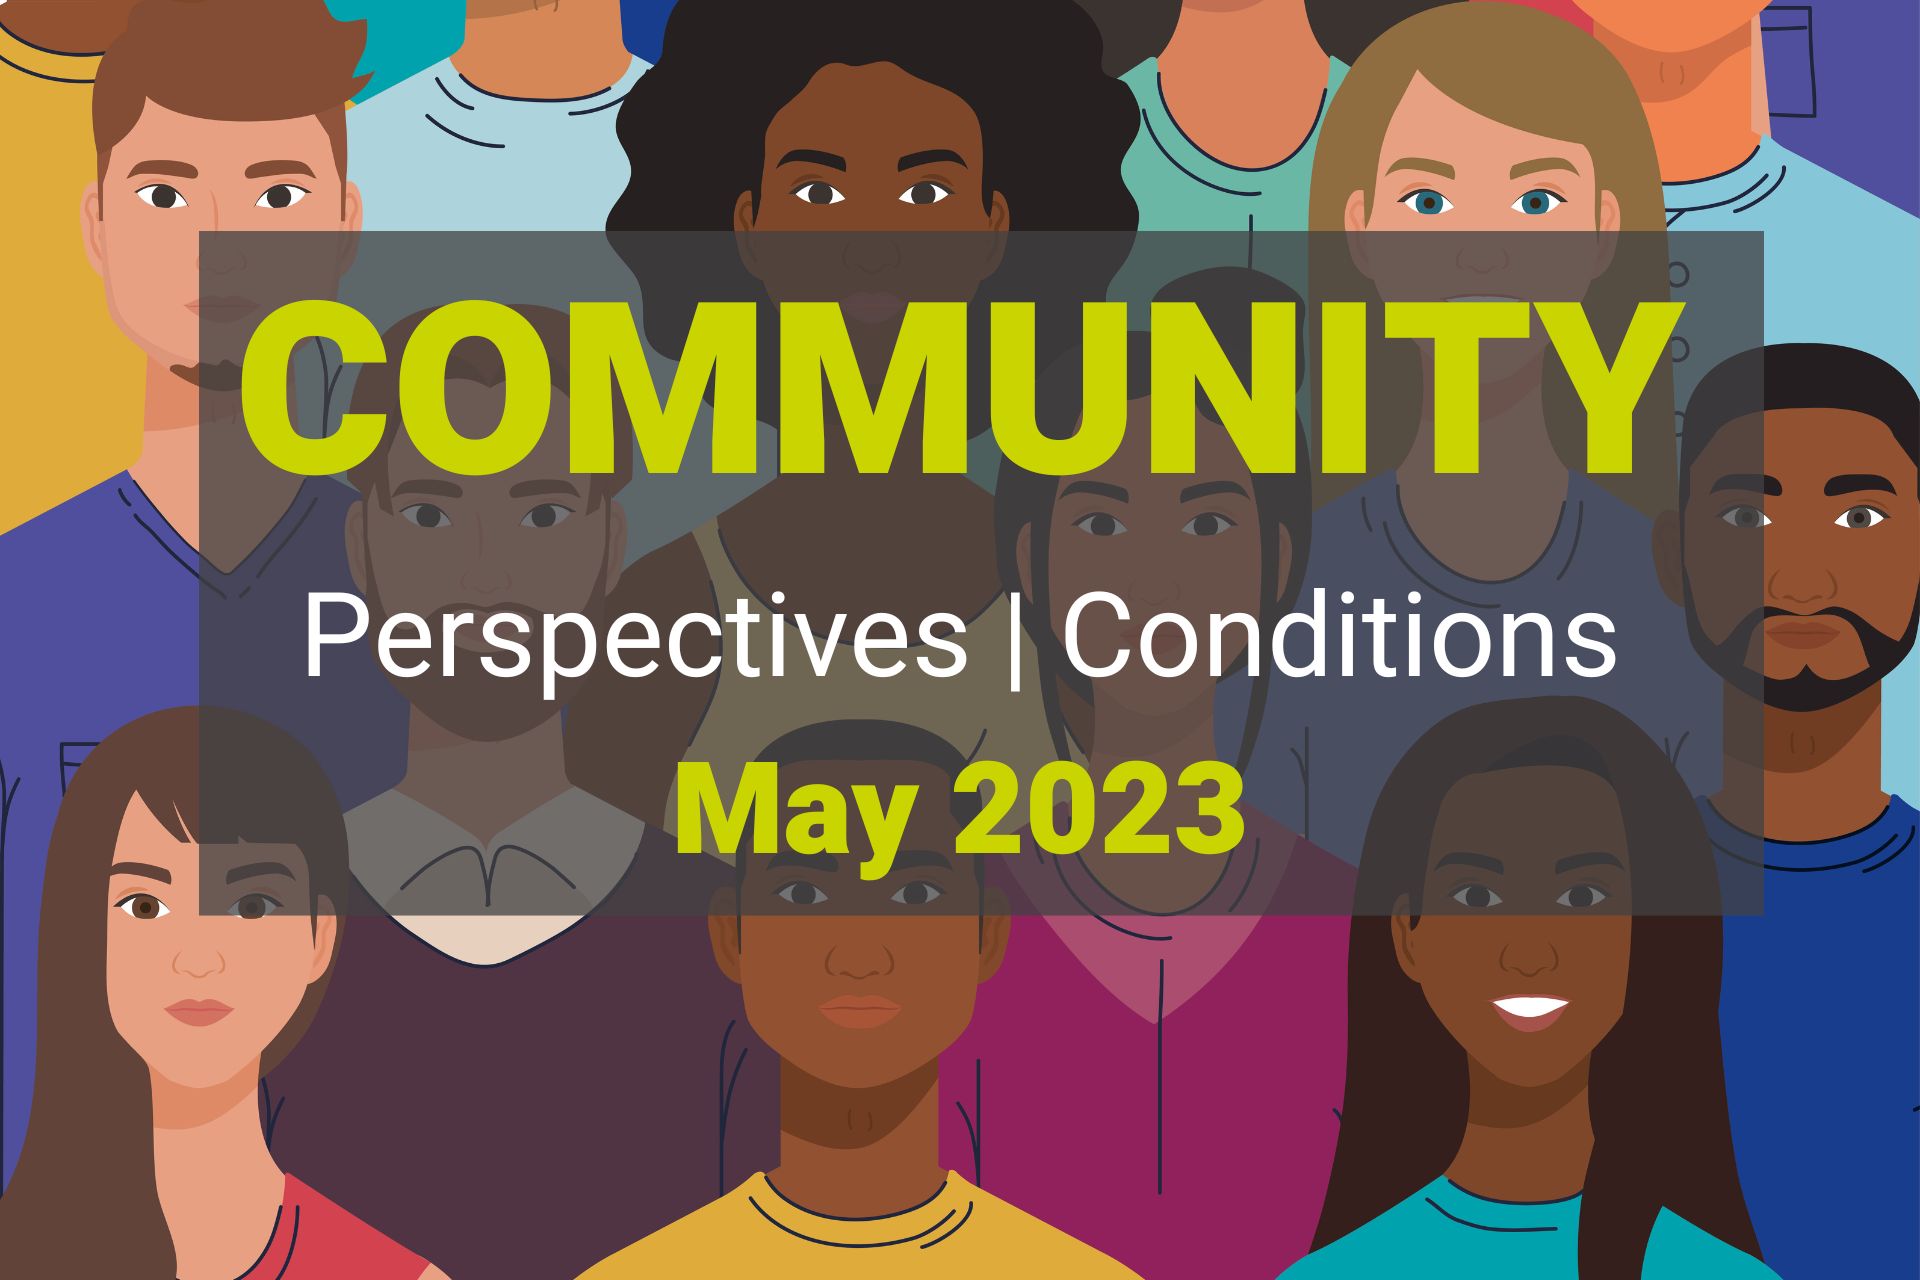 May 2023 Community Perspectives & Conditions